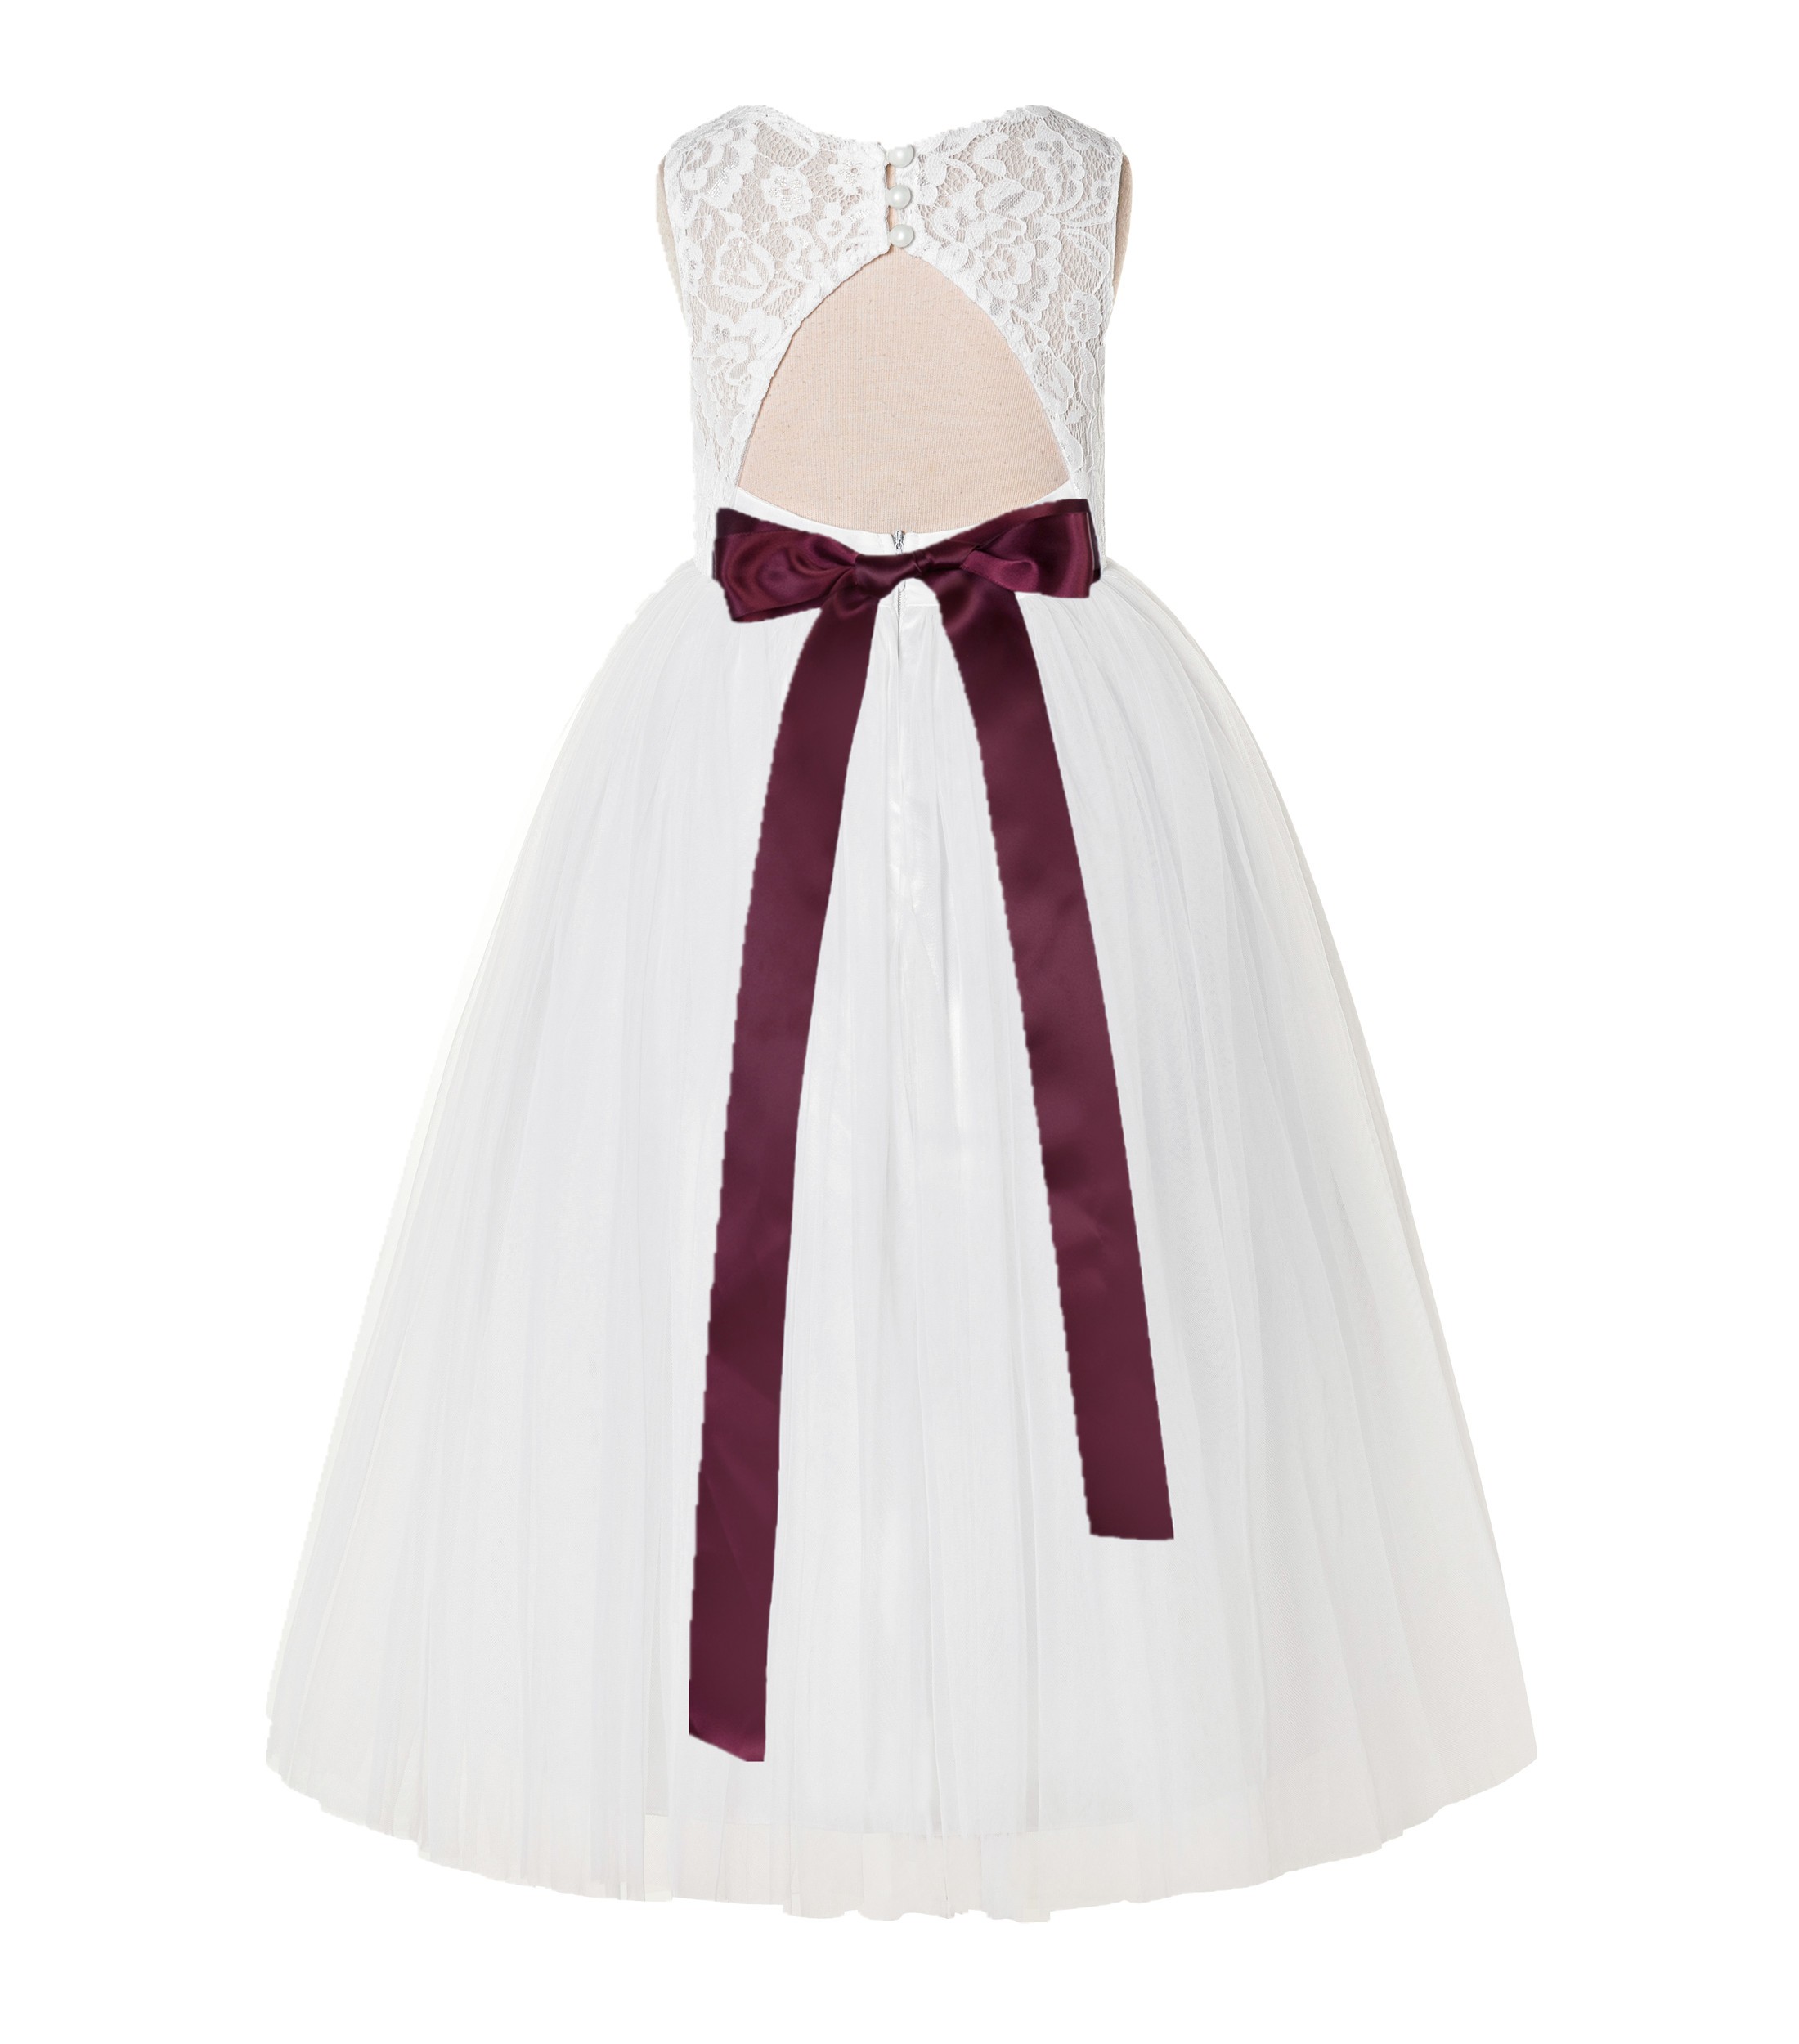 Ivory / Burgundy Tulle A-Line Lace Flower Girl Dress 178